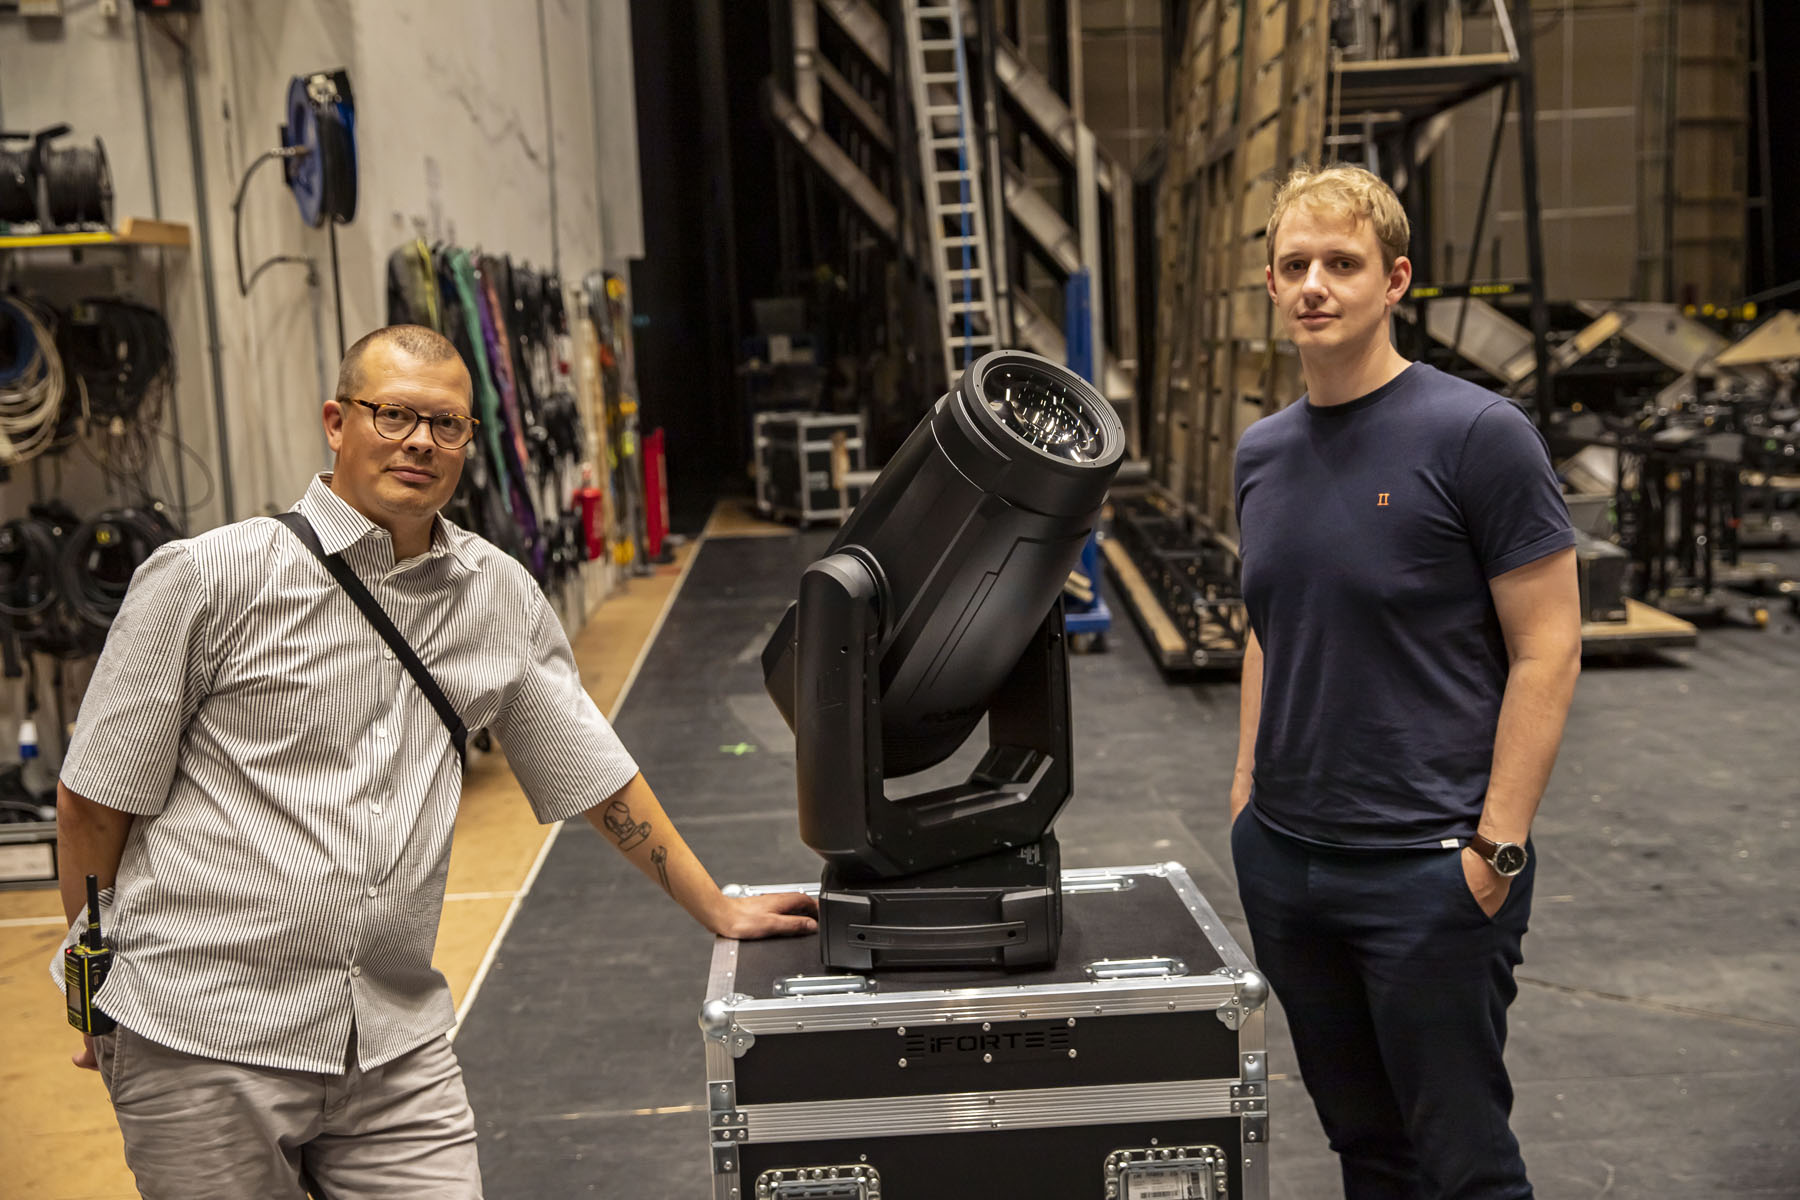 Royal Danish Operas Chief LX Sune Schou on the left with Martin Braad from Light Partner